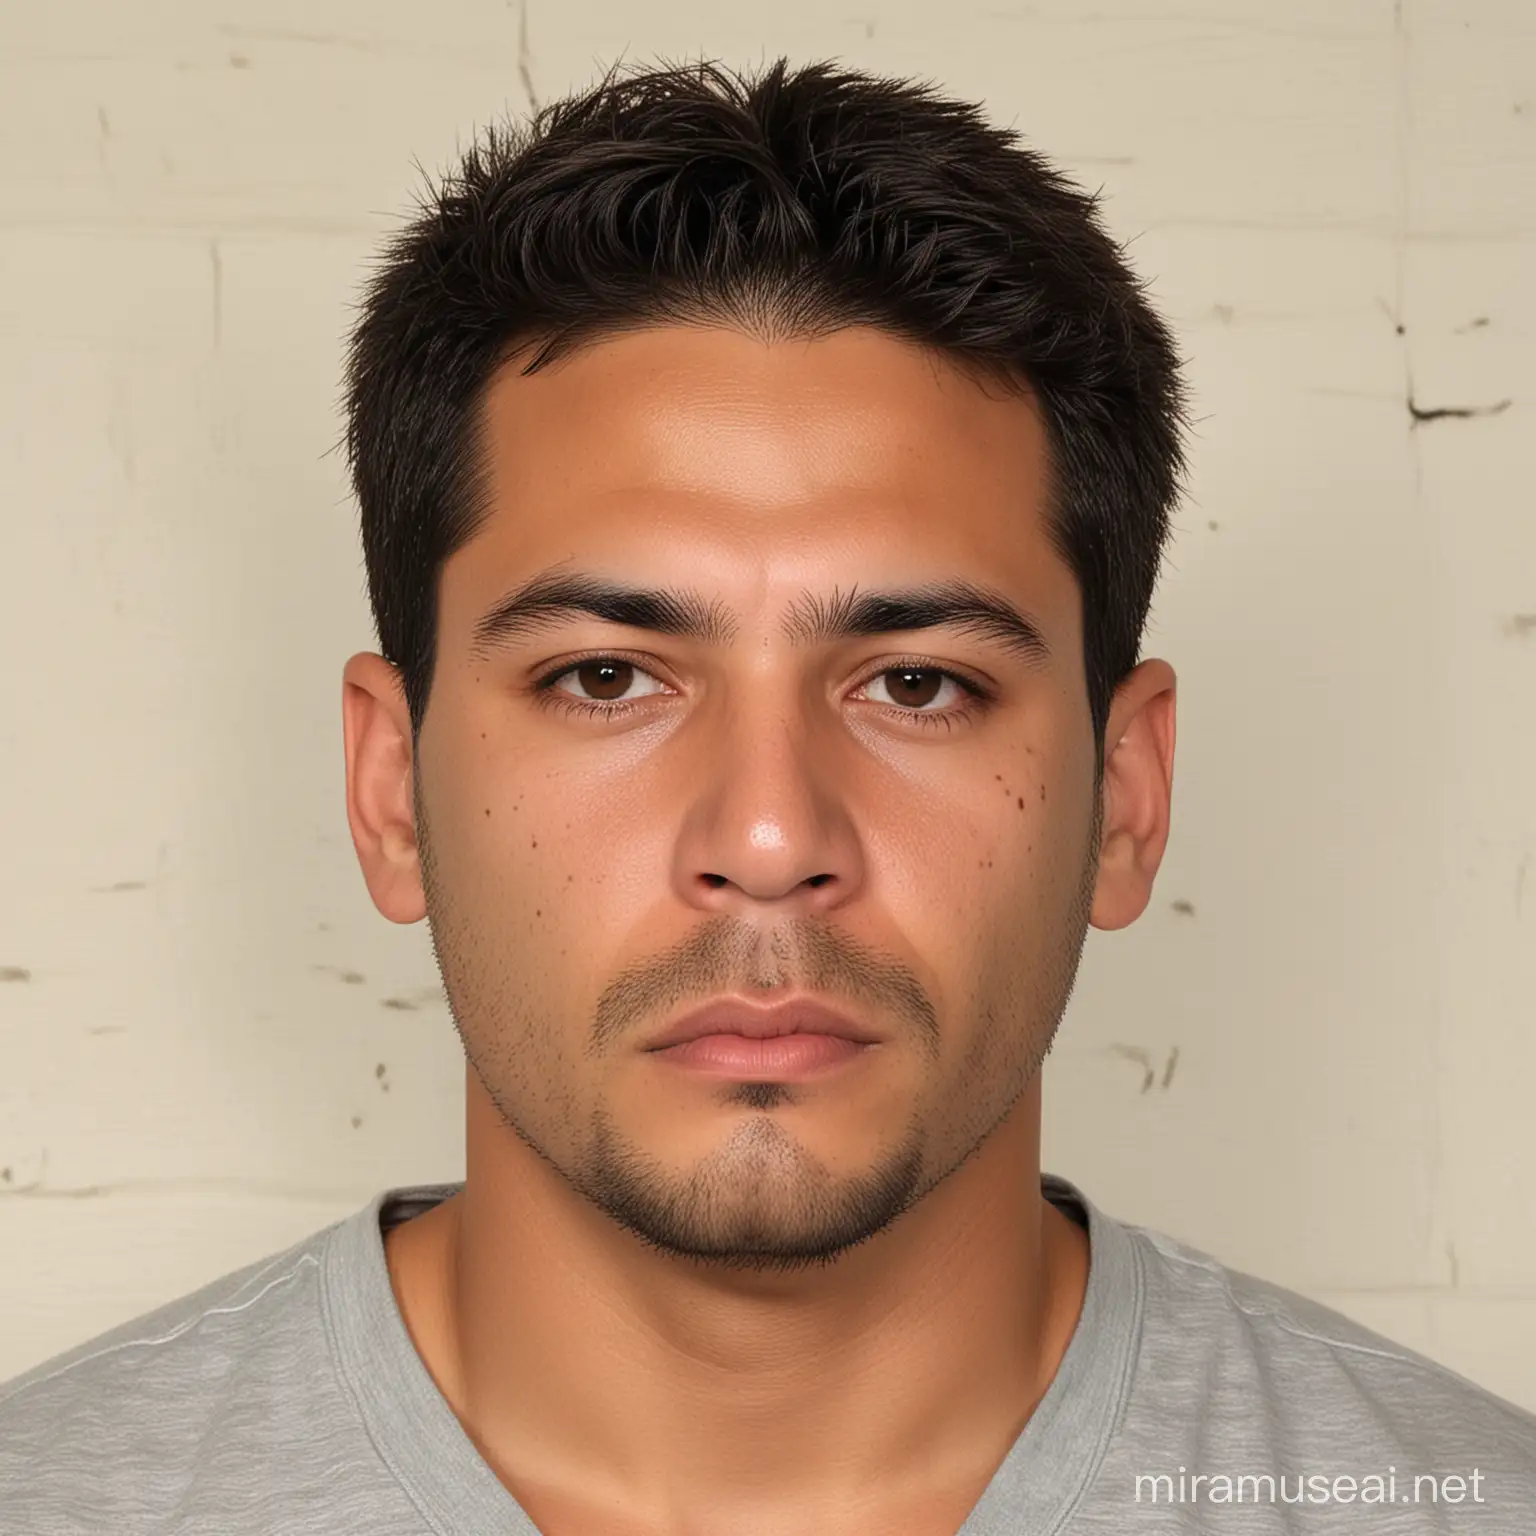 A mugshot of a wanted man named Michael Castro, a 200 lbs  Hispanic male with dark brown hair and brown eyes. Known to have a scar on his right cheek, Mugshot, 1993, white brick wall background